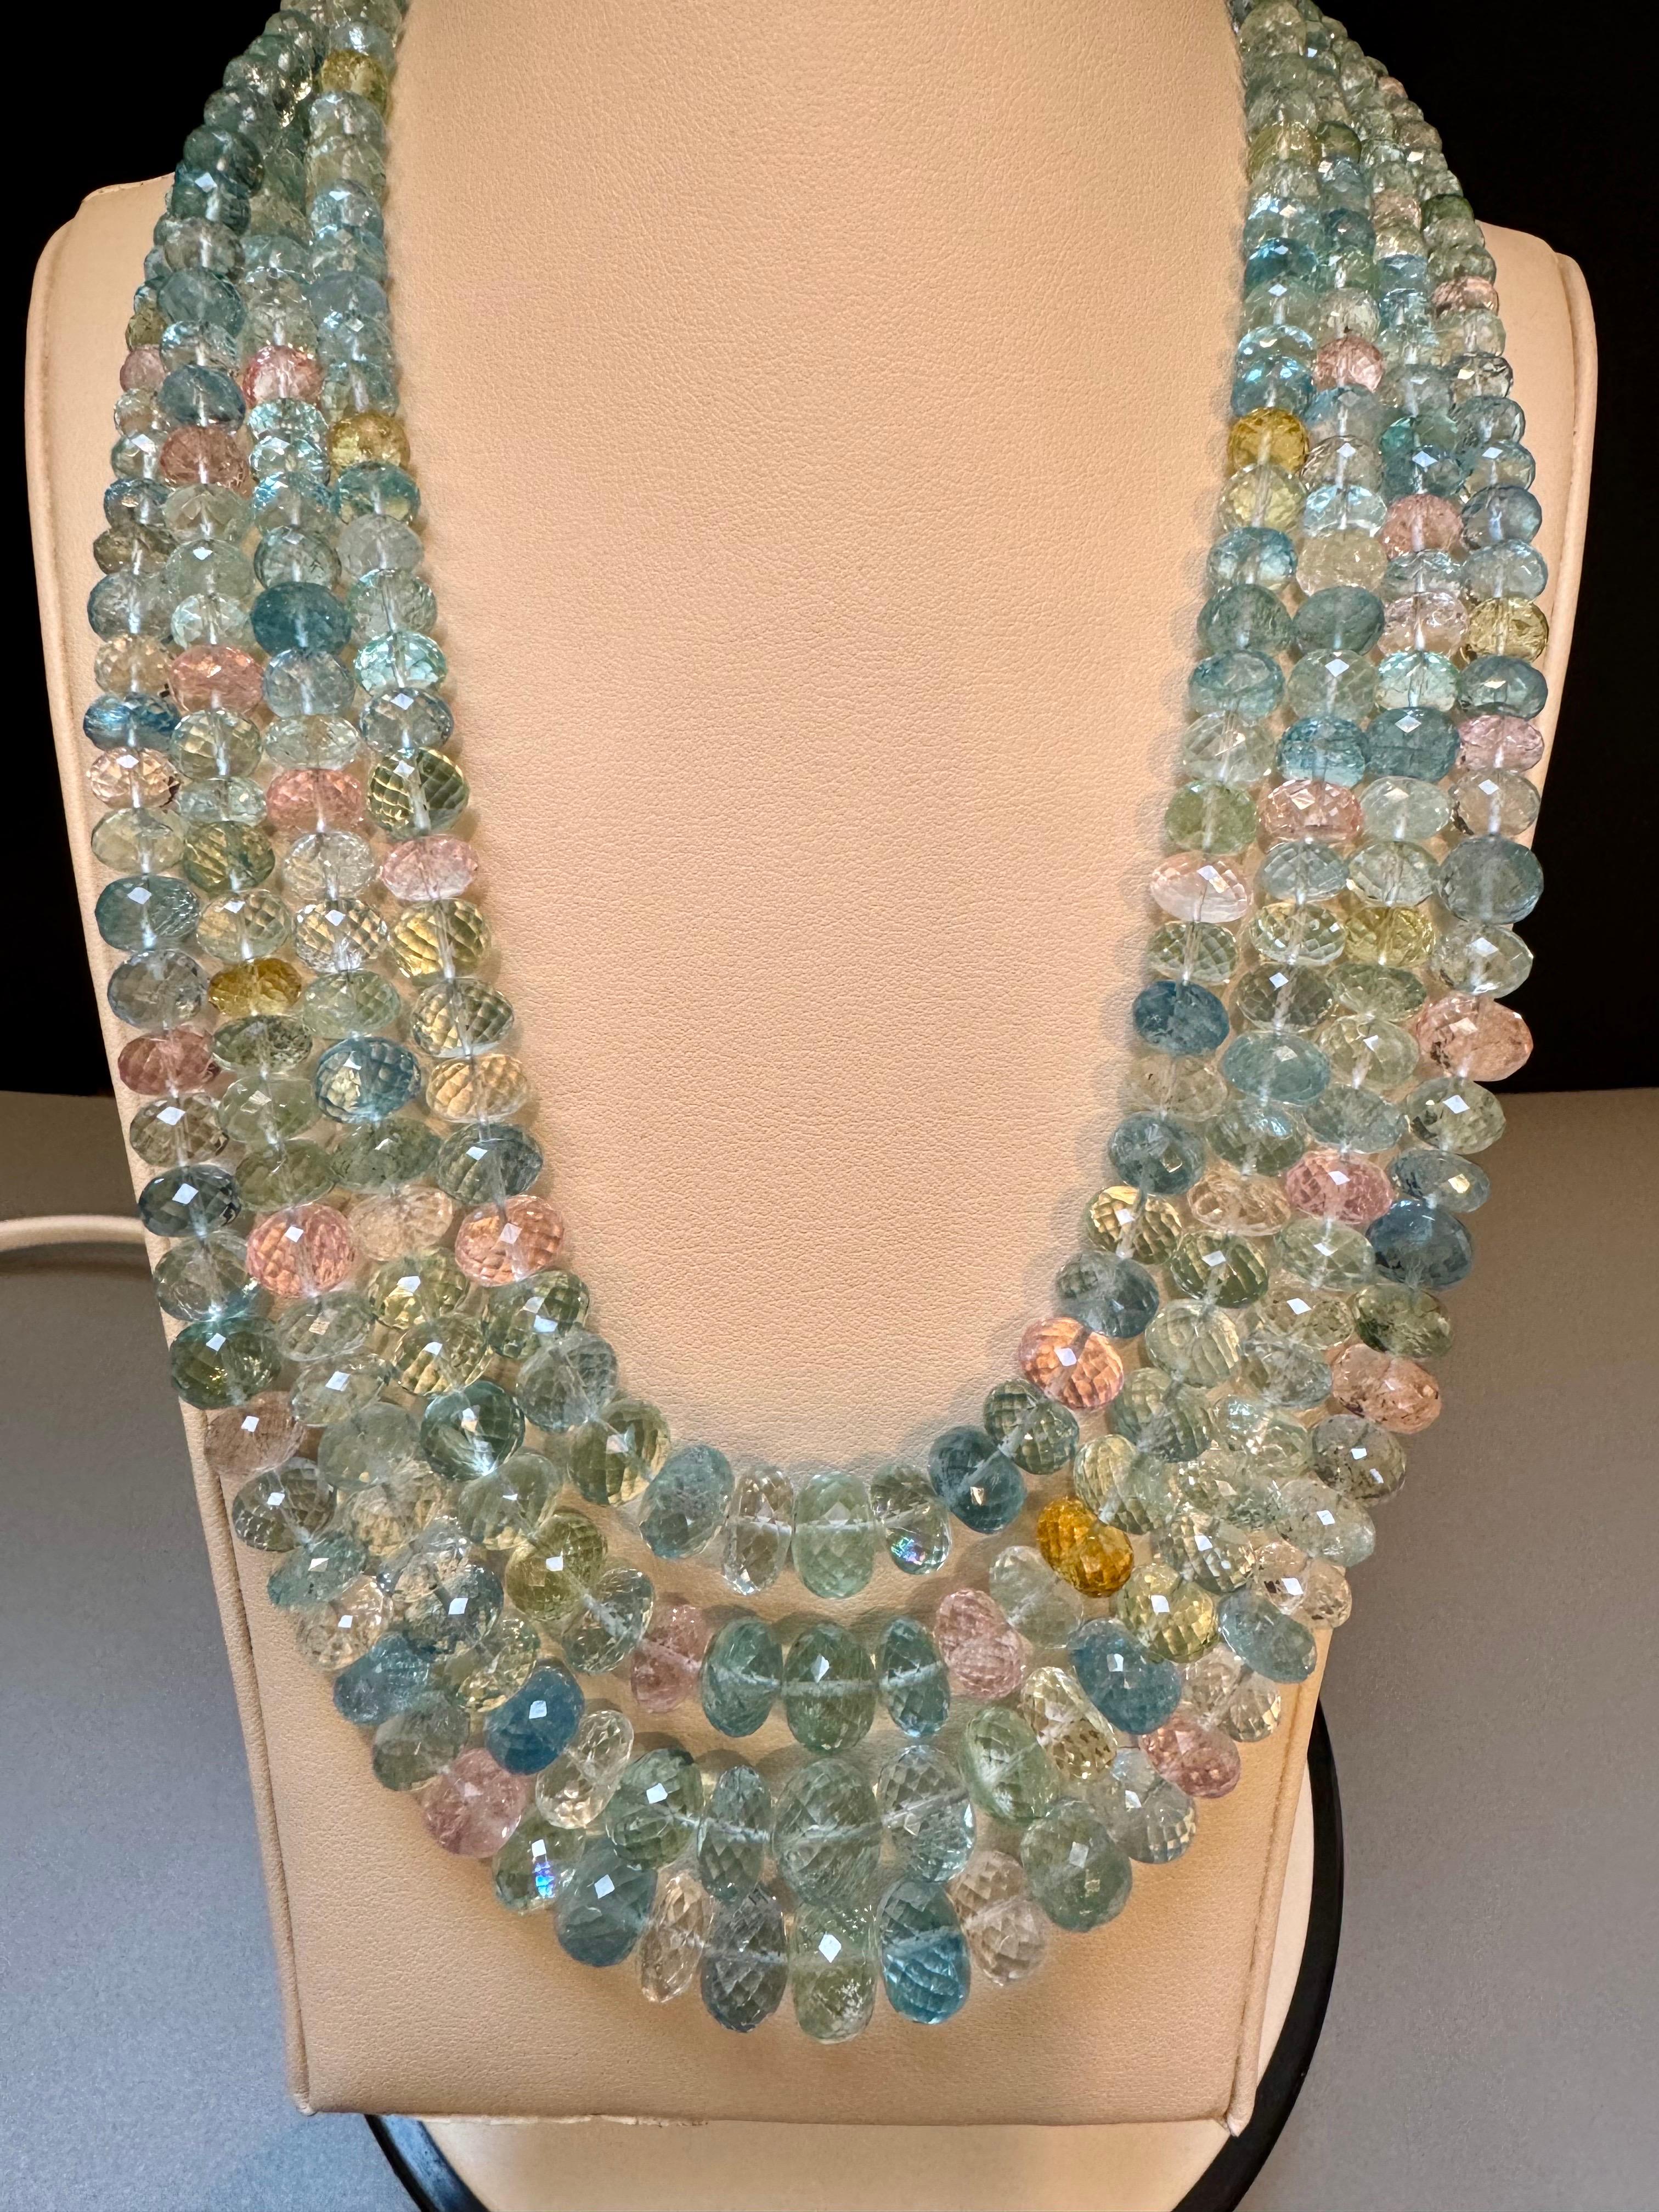 1000 Carat Natural Fine  Aquamarine Bead Necklace, Four Strand in Metal Clasp In Excellent Condition For Sale In New York, NY